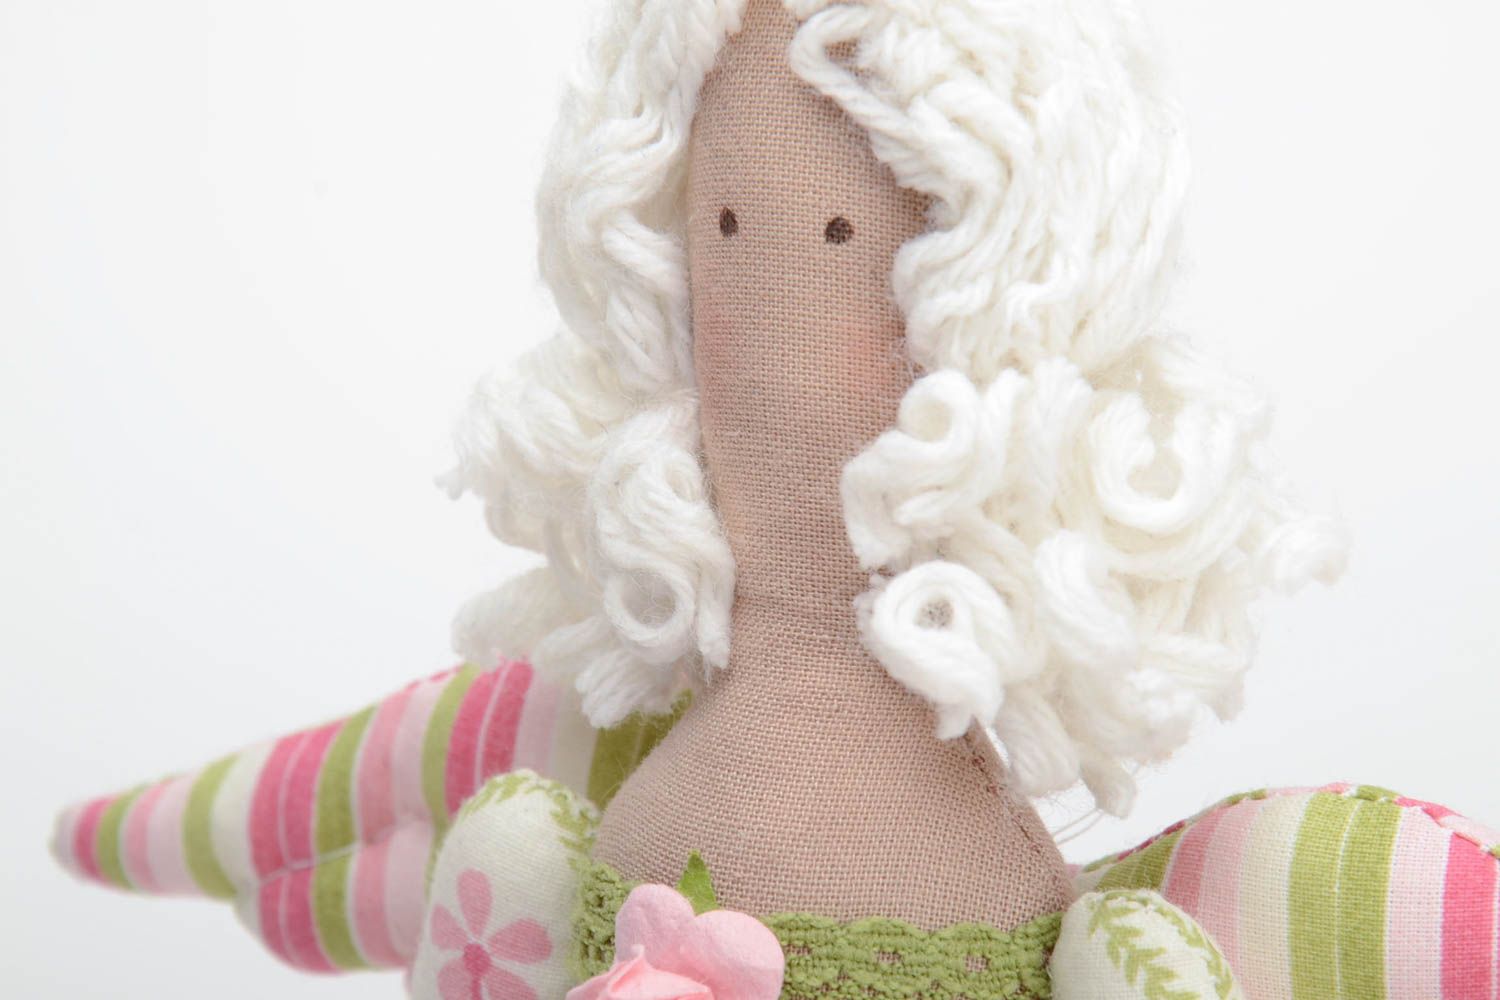 Handmade cotton fabric soft doll angel in floral dress with white hair  photo 3